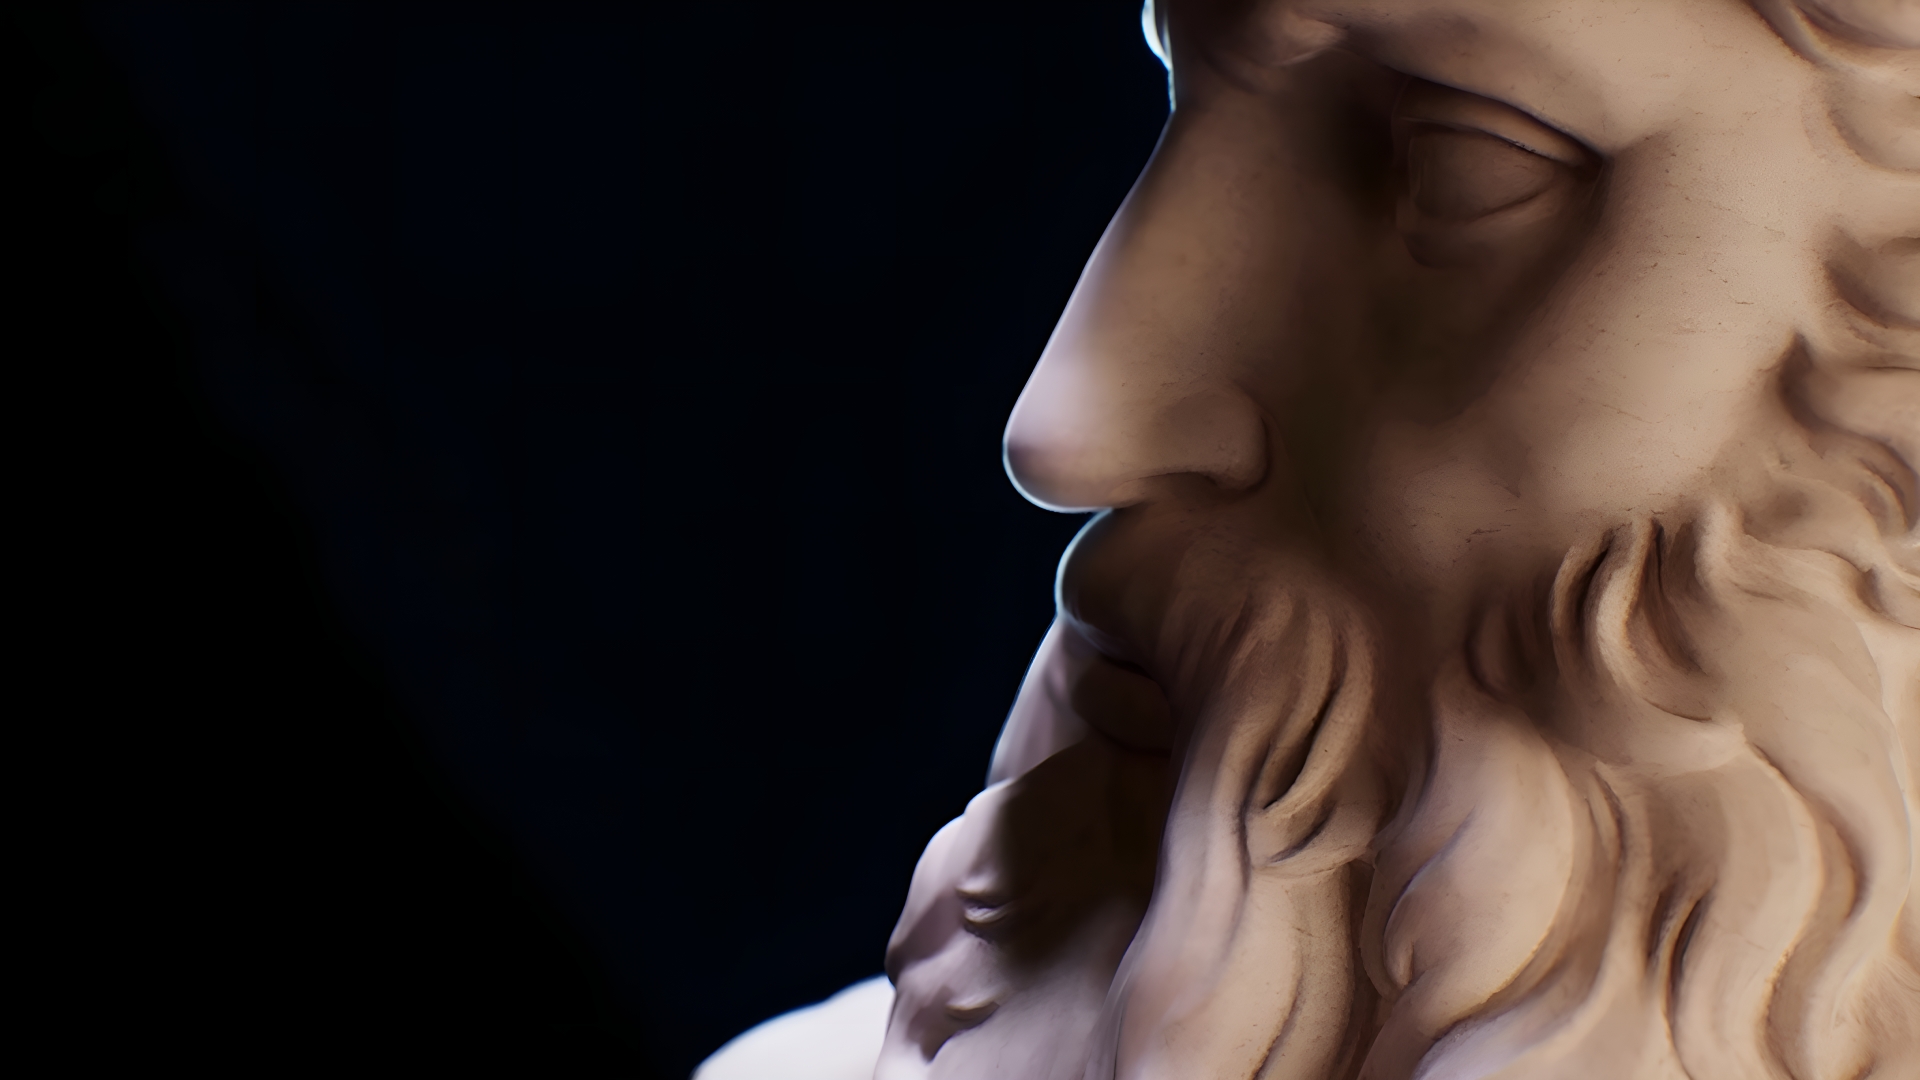 3D reproduction of the Statue of Moses for the Sky documentary "Michelangelo-Santo e Peccatore"